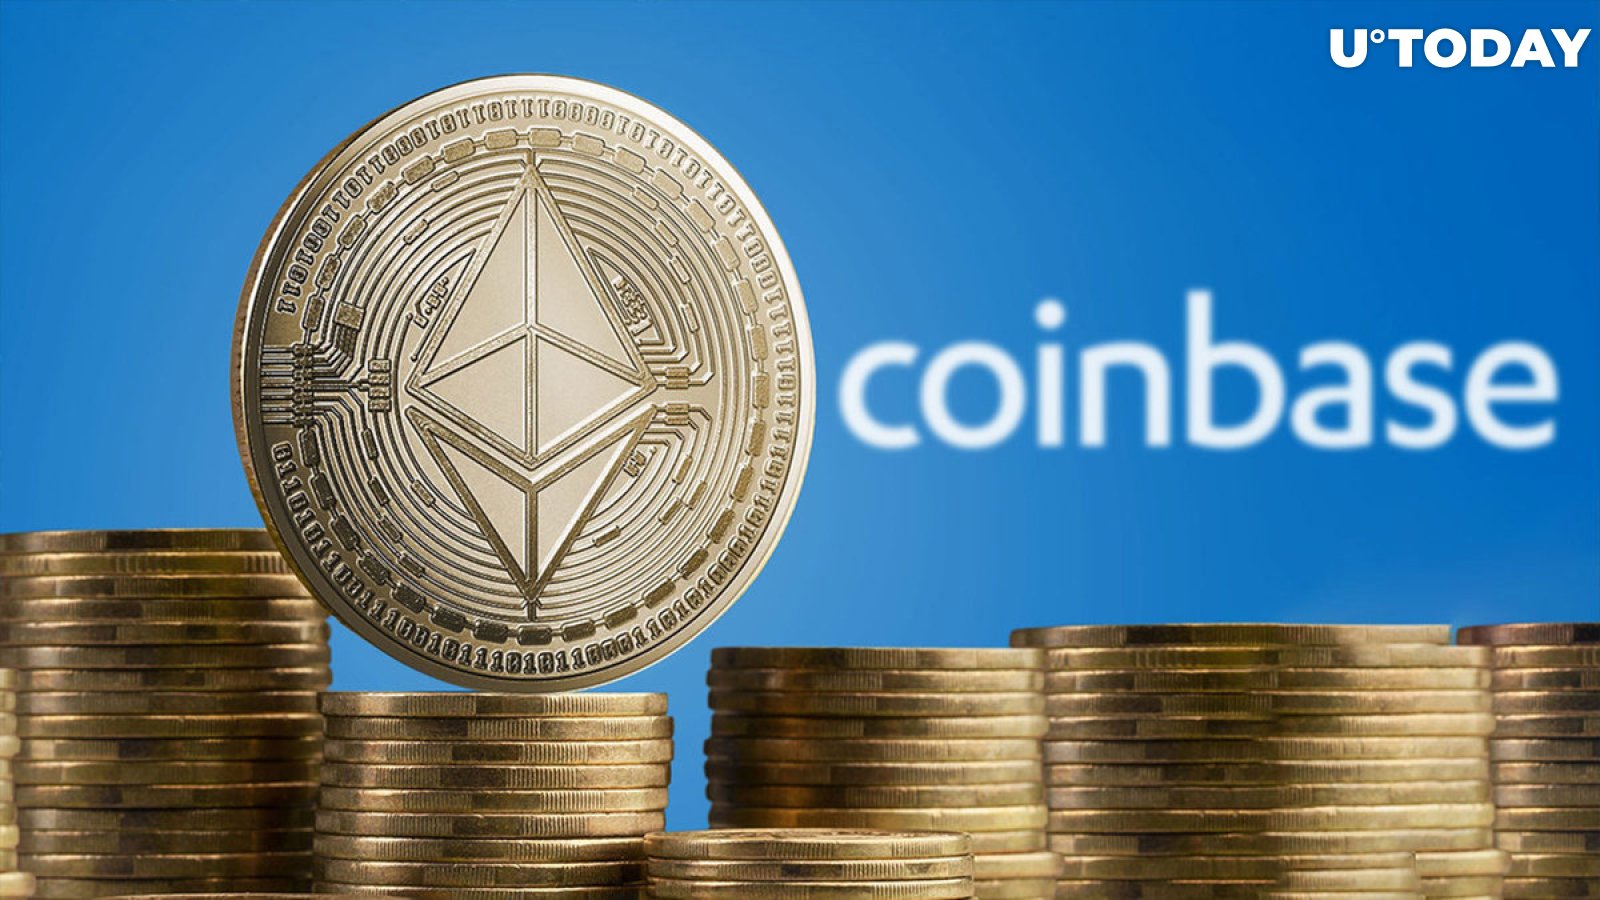 300,000 ETH Moved to Coinbase, Here's What Happened Next